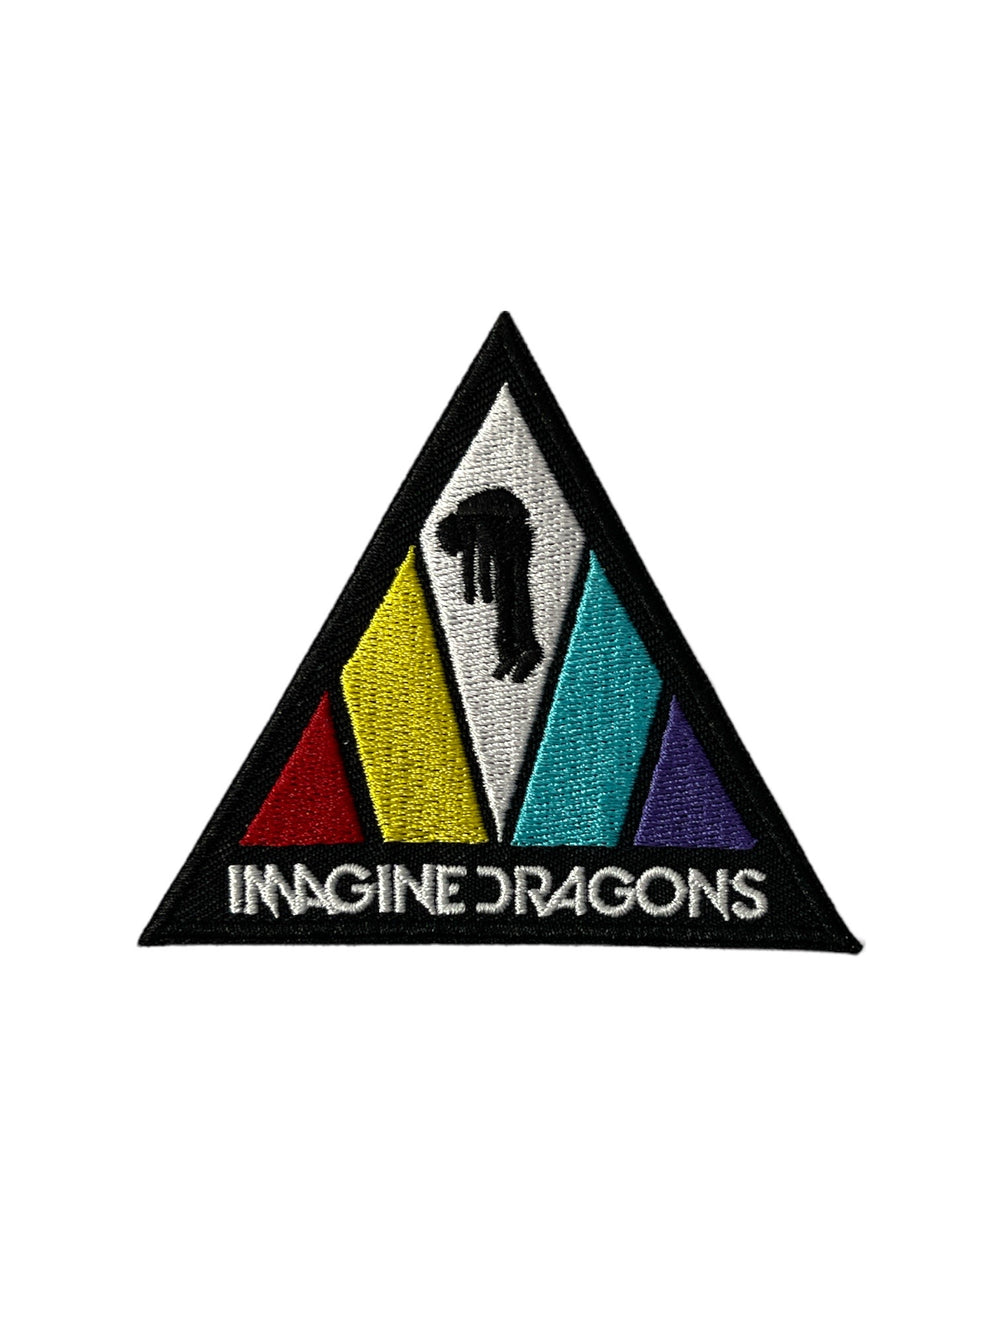 Imagine Dragons Standard Triangle Official Woven Patch Brand New Official